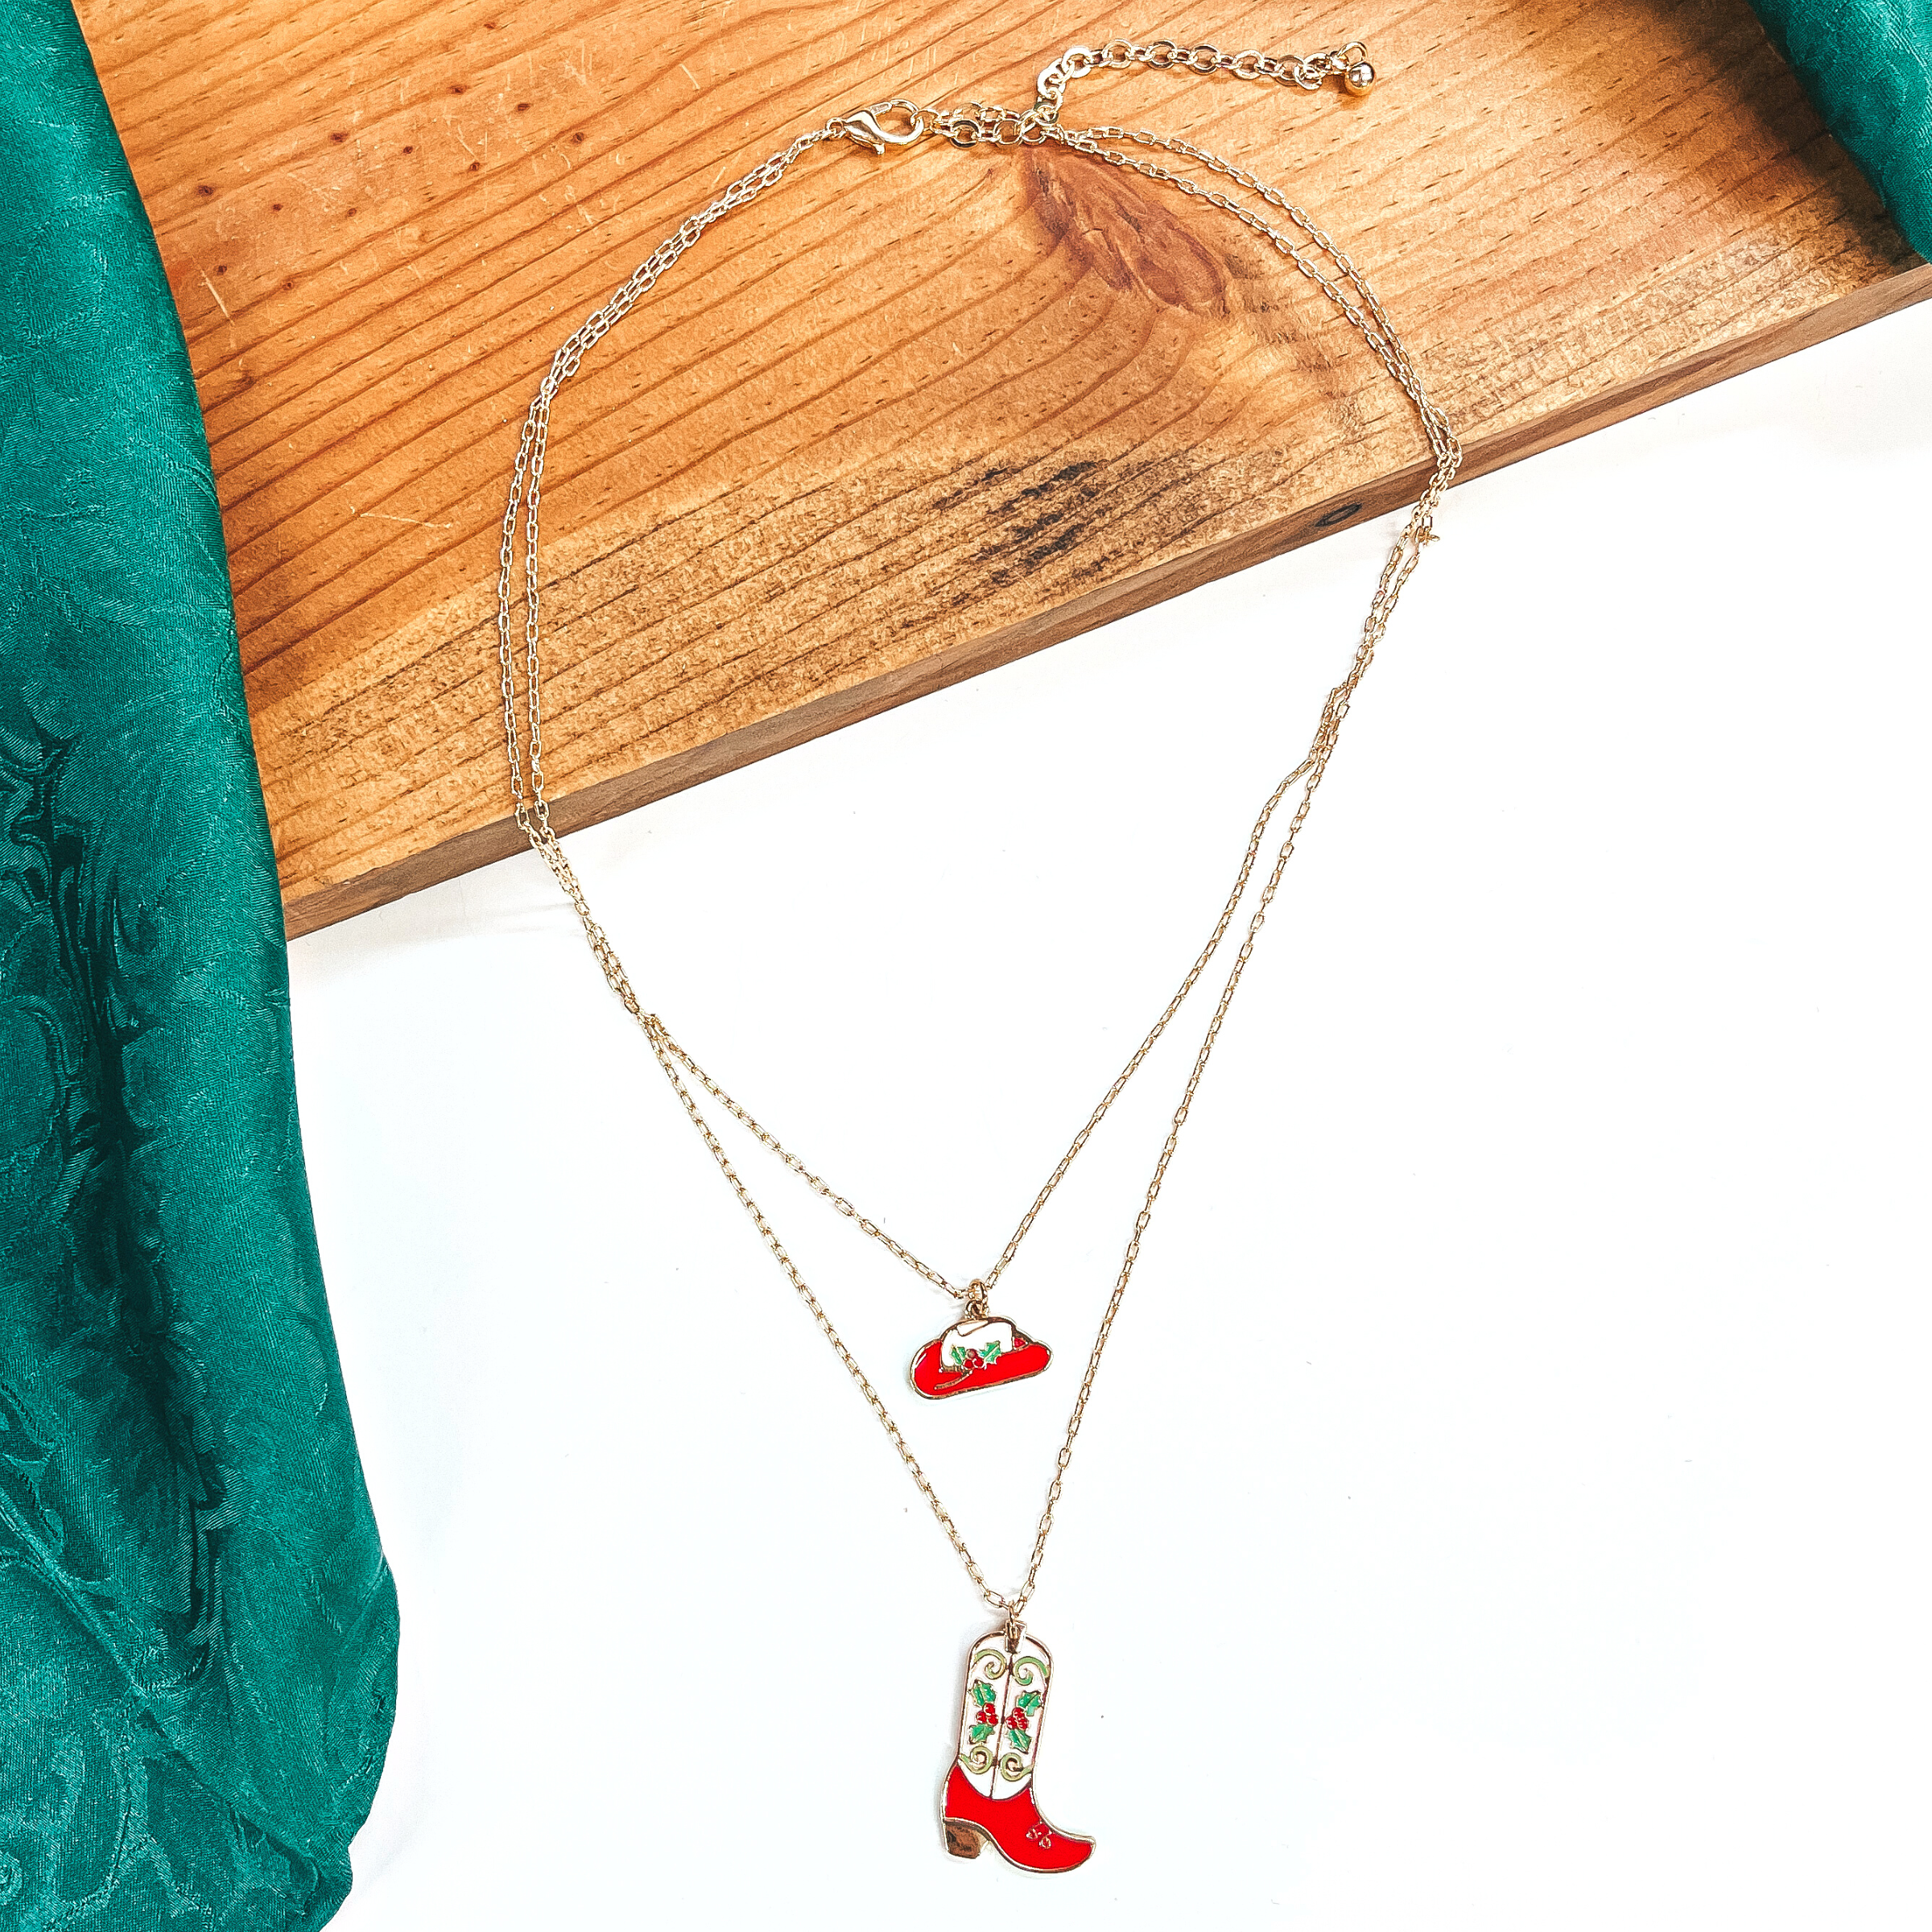 This is a double strand gold necklace with two hanging pendants.  The smaller strand has a hat pendant and the longer strand has a  boot pendant. Both pendants are red and white with mistletoe design  on them in a gold setting. This necklace is laying on a  white background and a slab of wood, with a green wild rag in the side as decor.